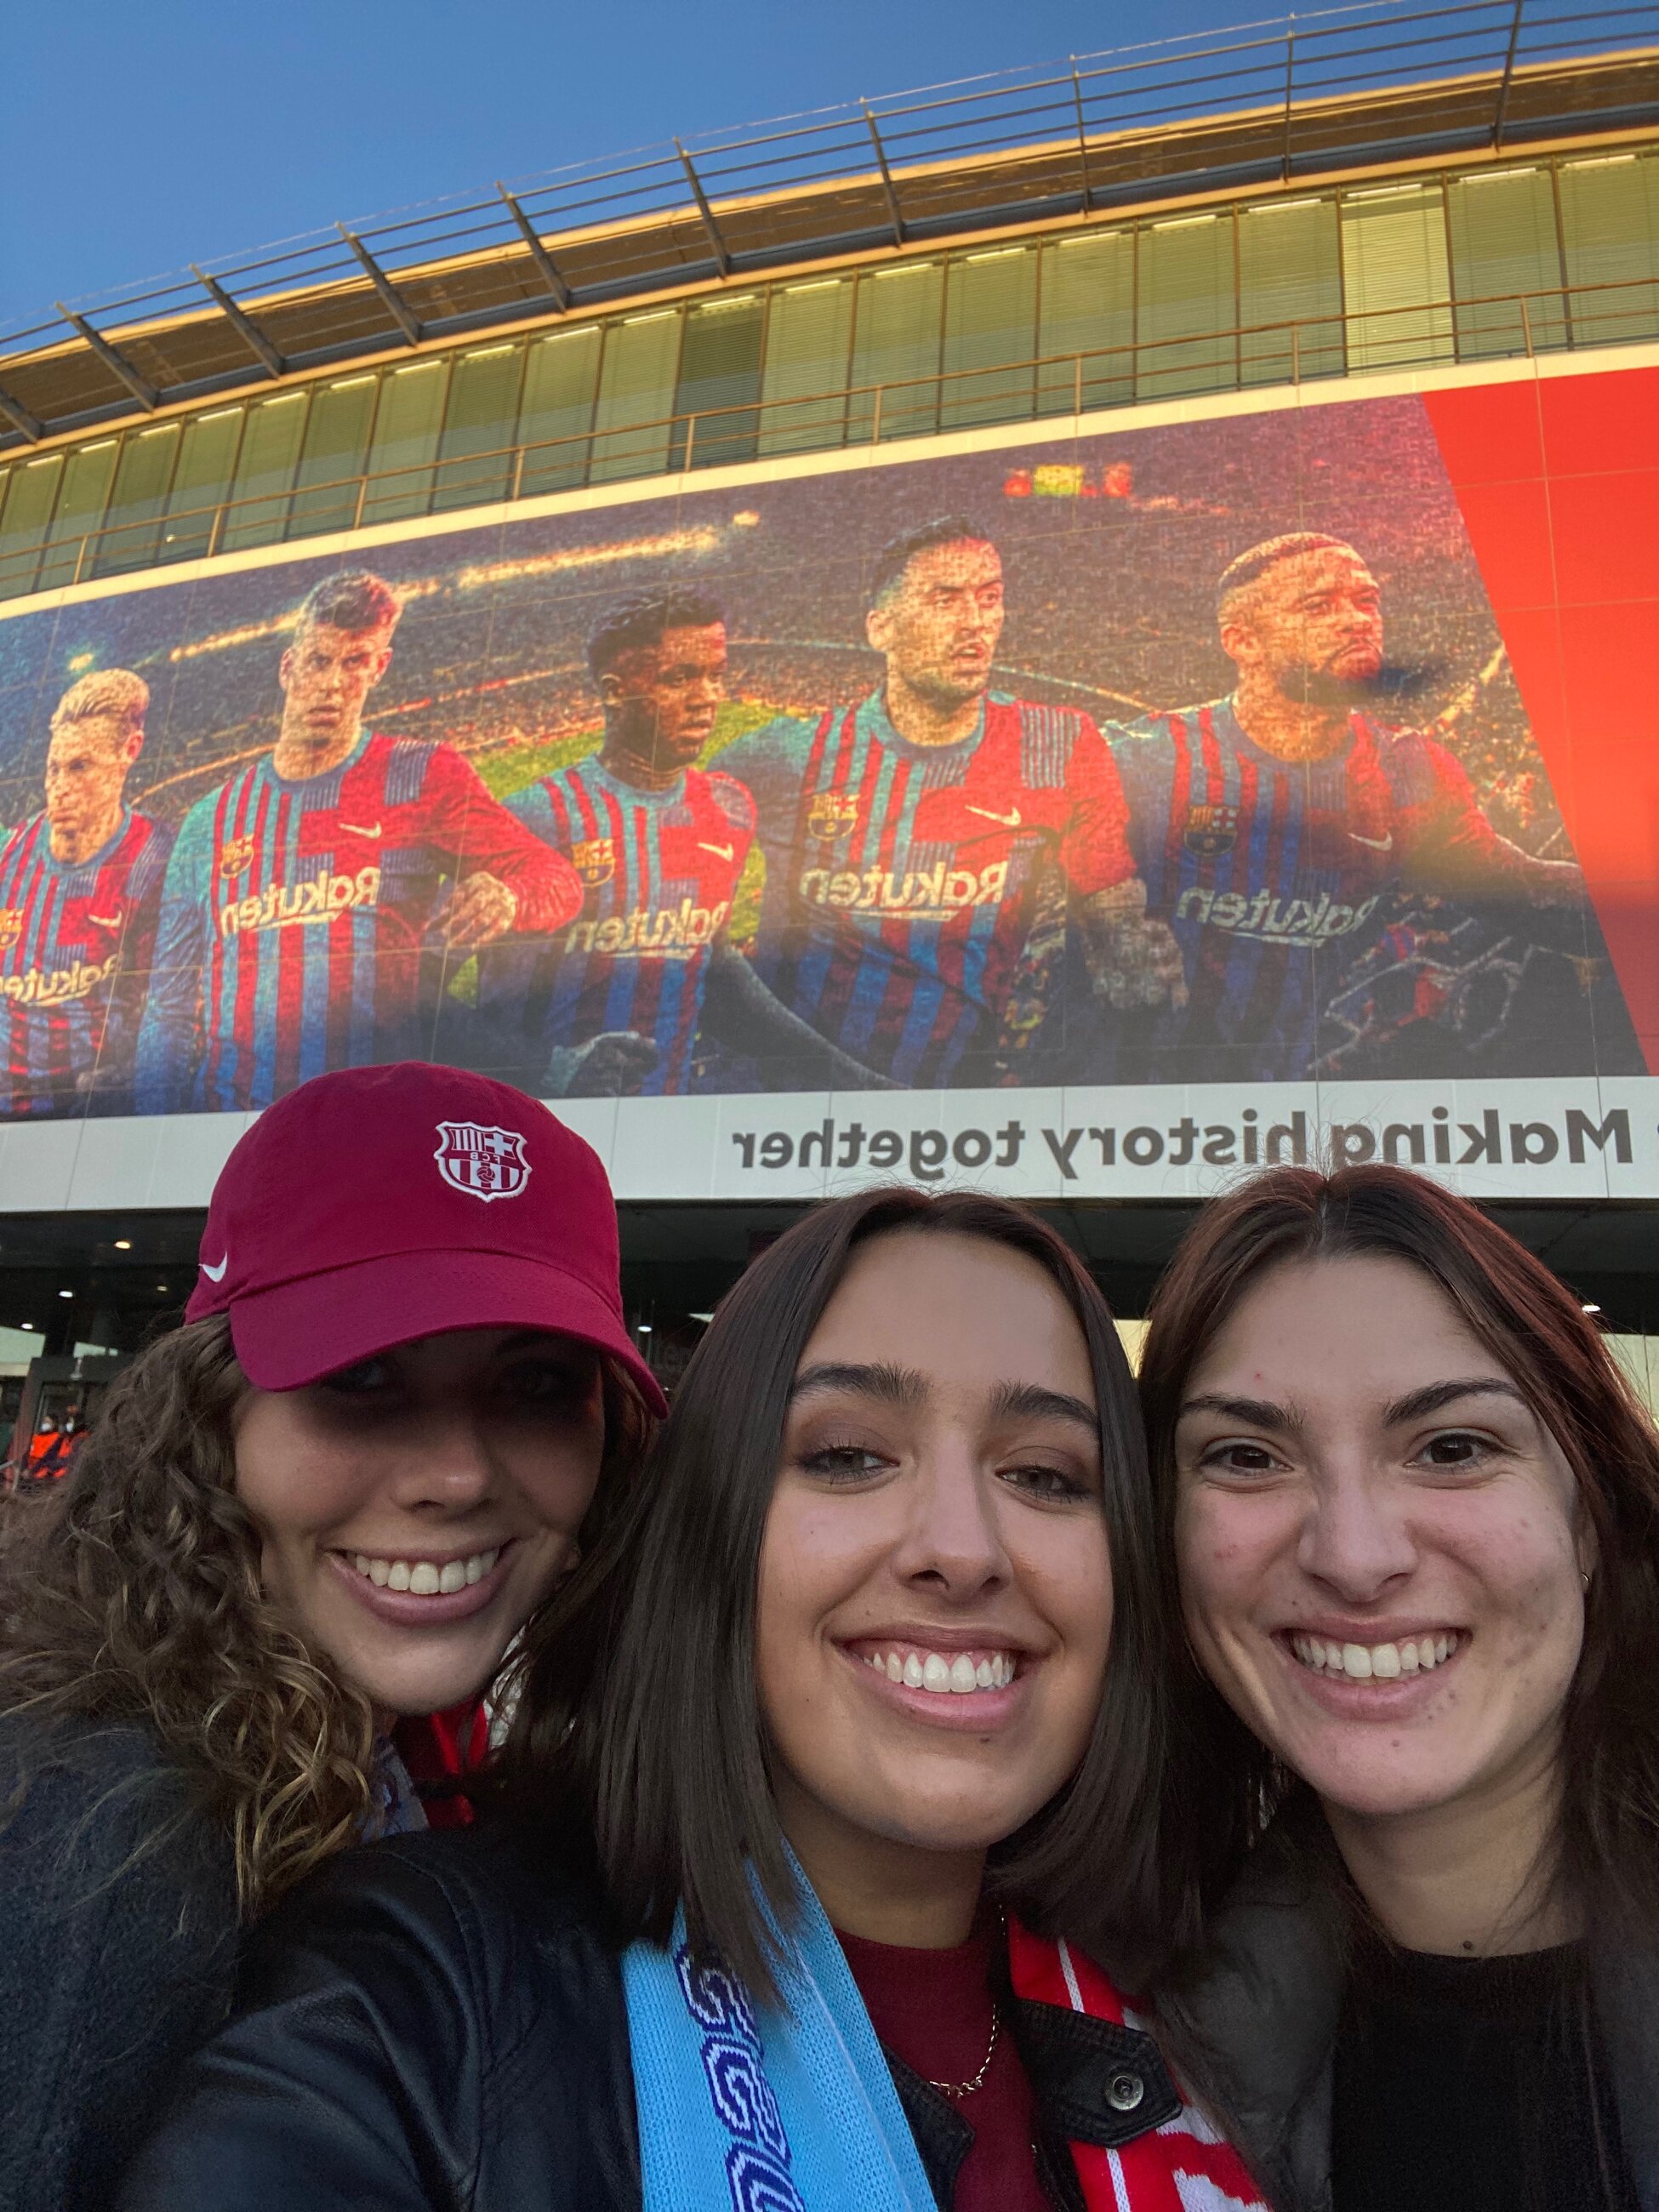 Friends and I at the FC Barcelona game!